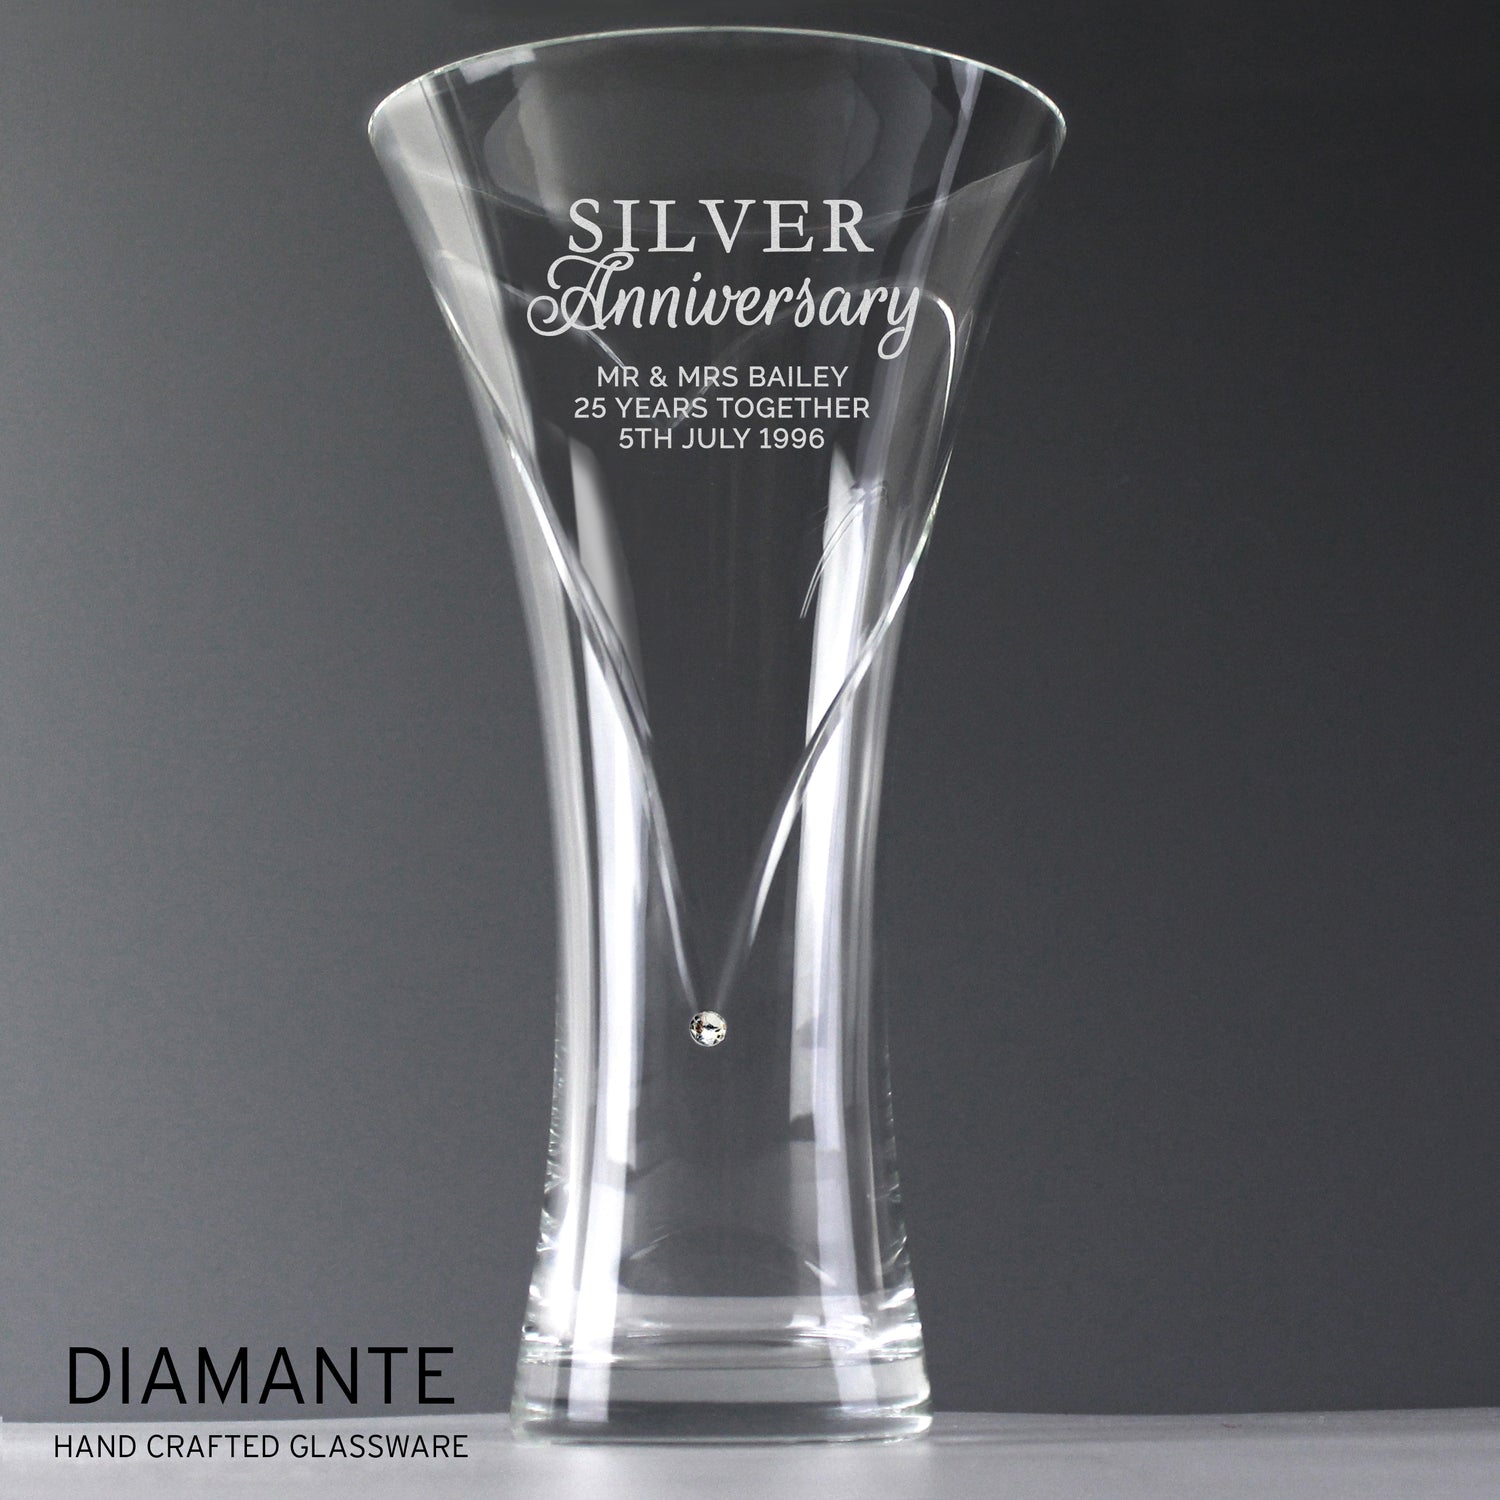 Personalised Engraved Anniversary Gifts | Free UK Delivery 